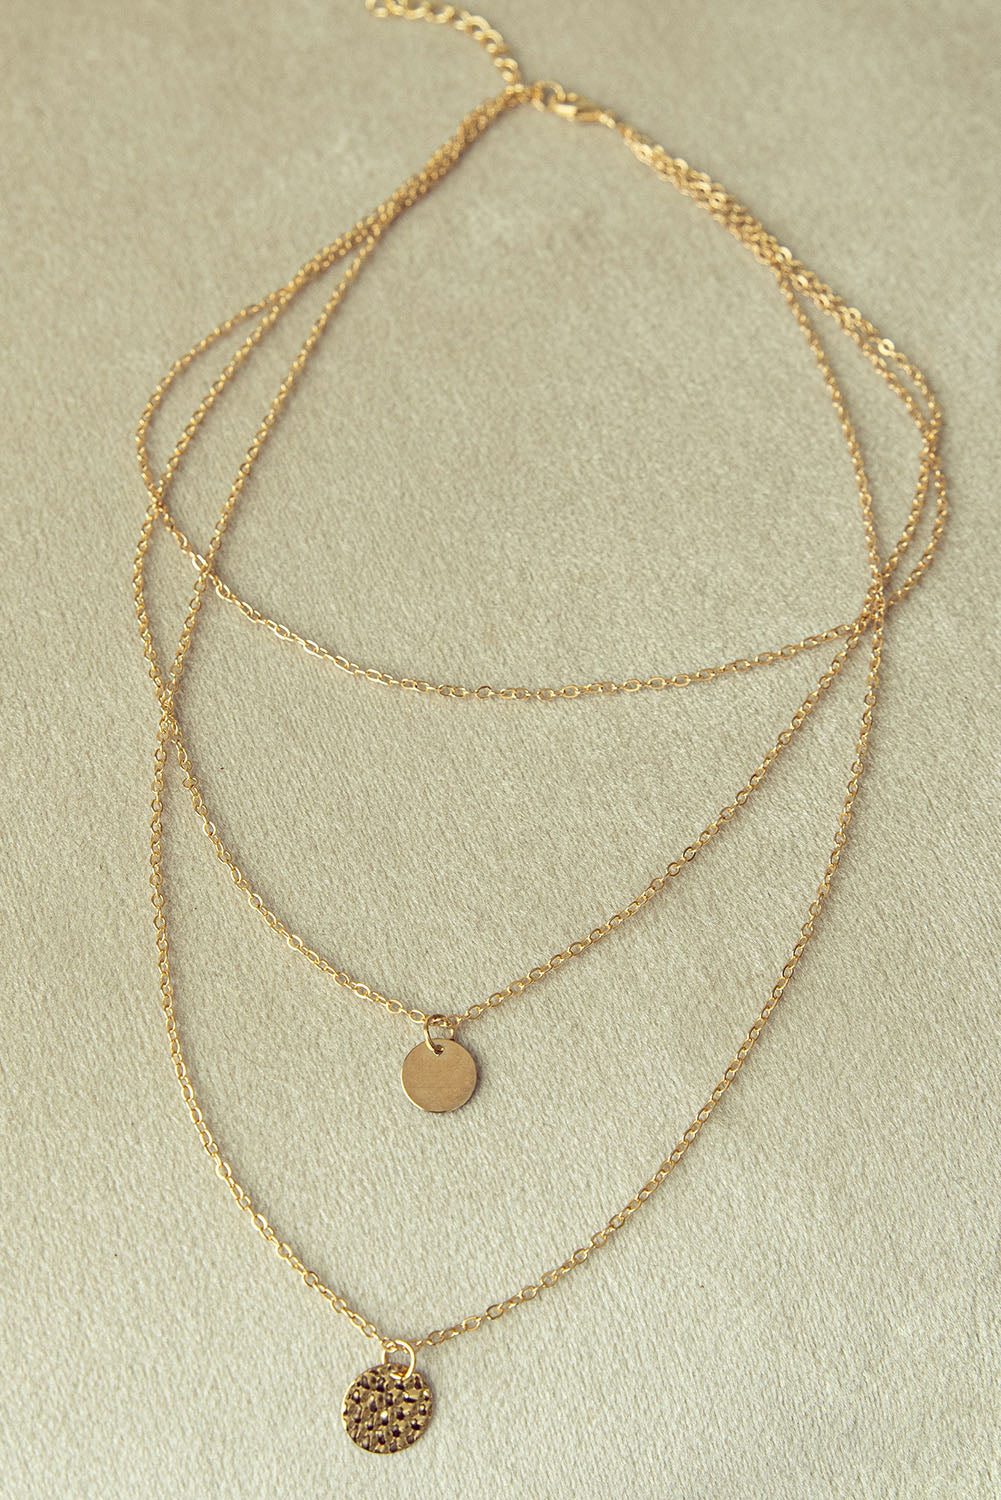 Multi-layered Round Pendant Necklace - The Gold Cactus